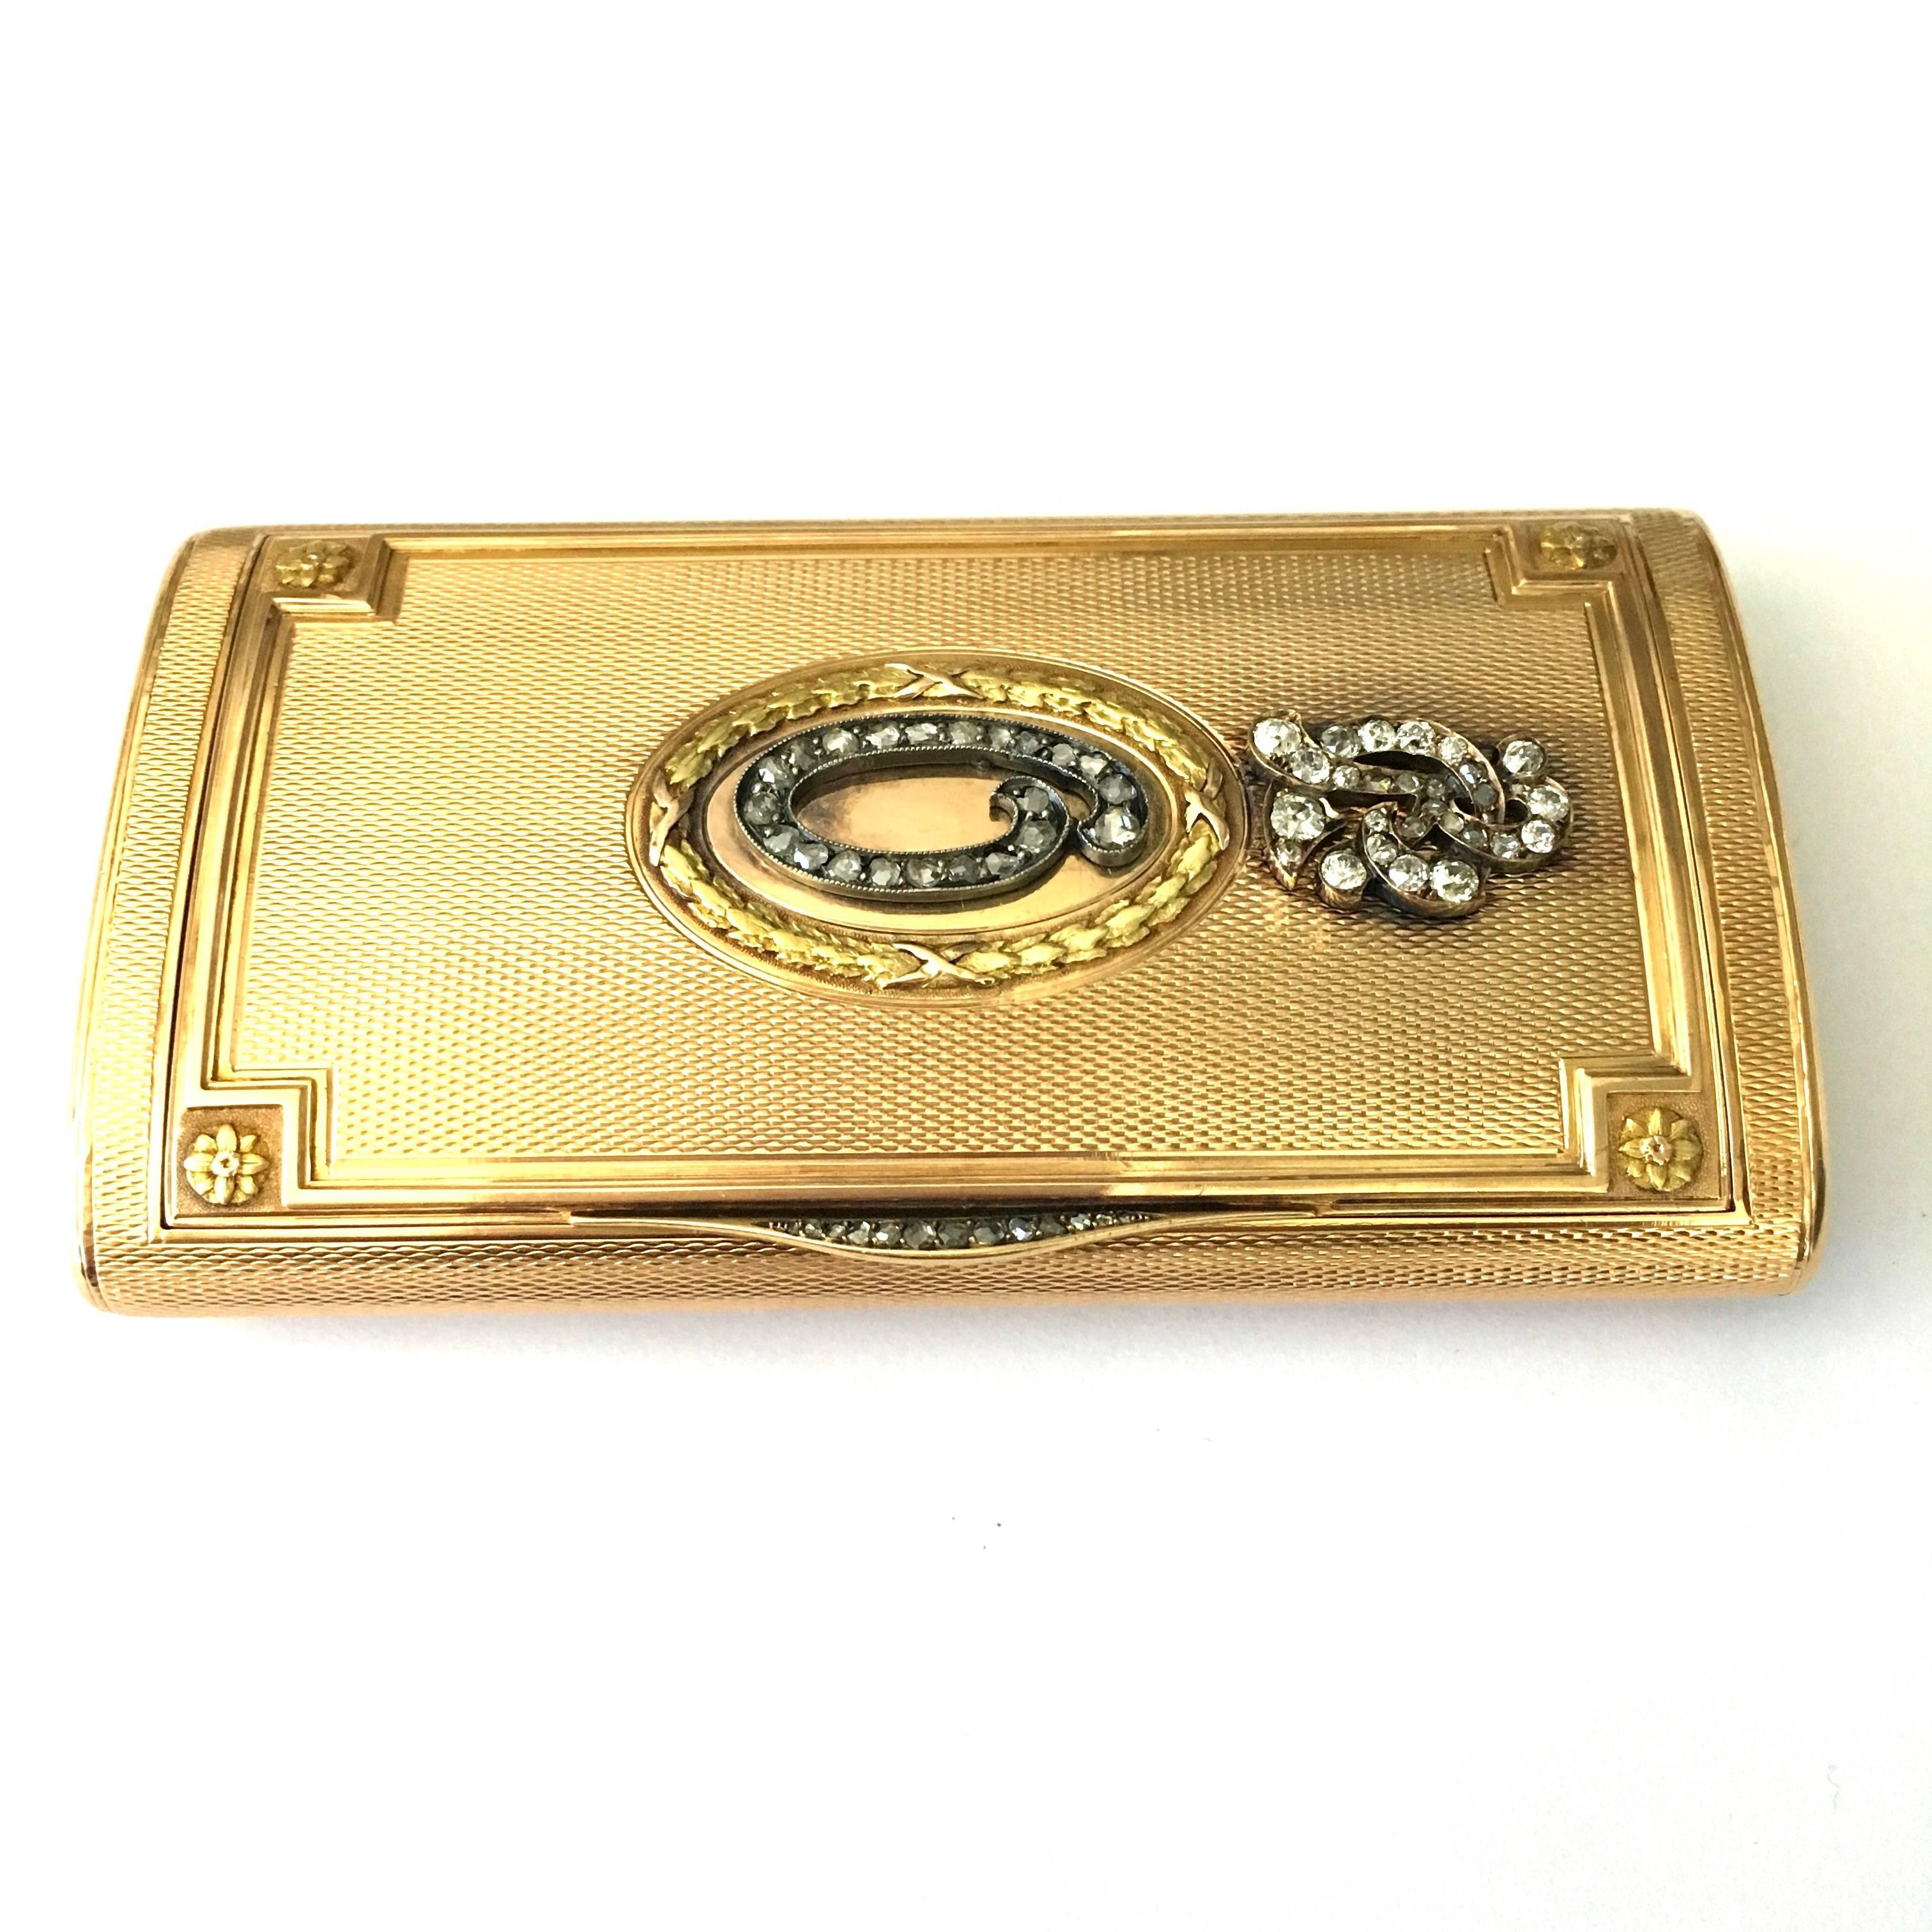 LACLOCHE FRÈRES 18K try-color gold vanity case with rose cut old mine cut diamonds. Rounded rectangular form with a hinged lid opening, diamond set initials.
Signed ‘Lacloche Frères Paris 15 Rue De La Paix, Paris’, numbered 5375, French assay